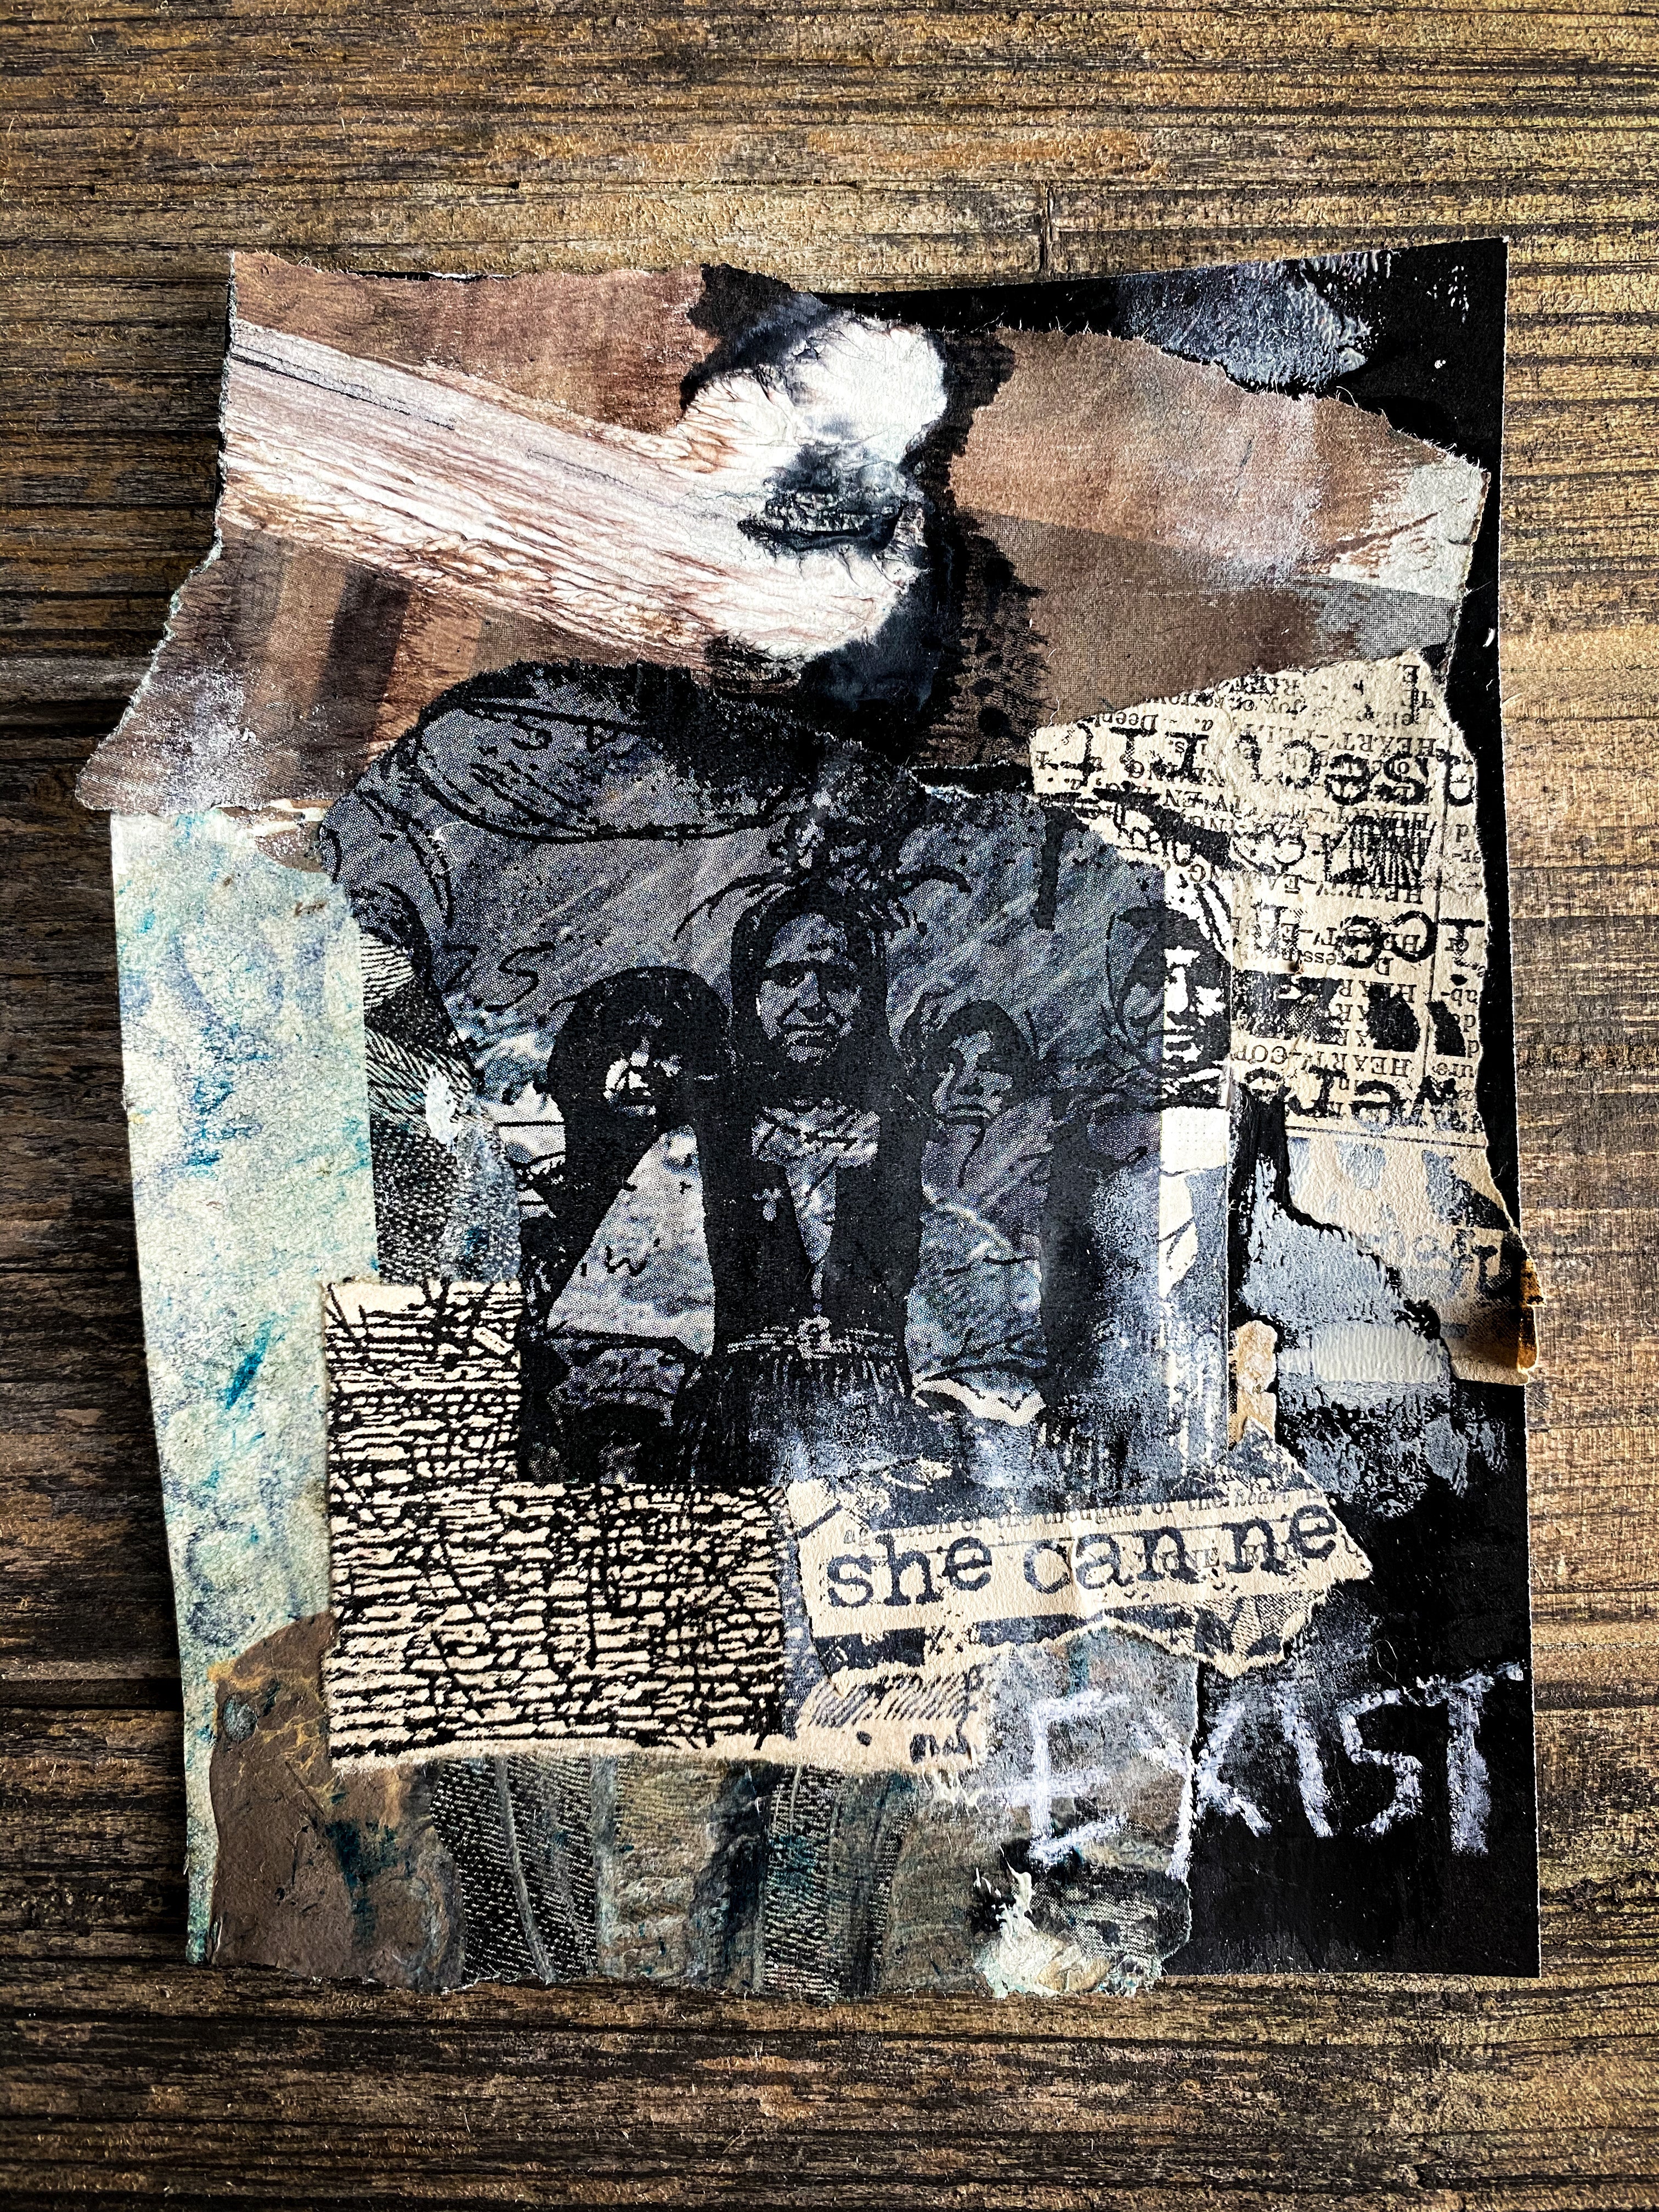 She Can Exist - Original Mixed Media Collage